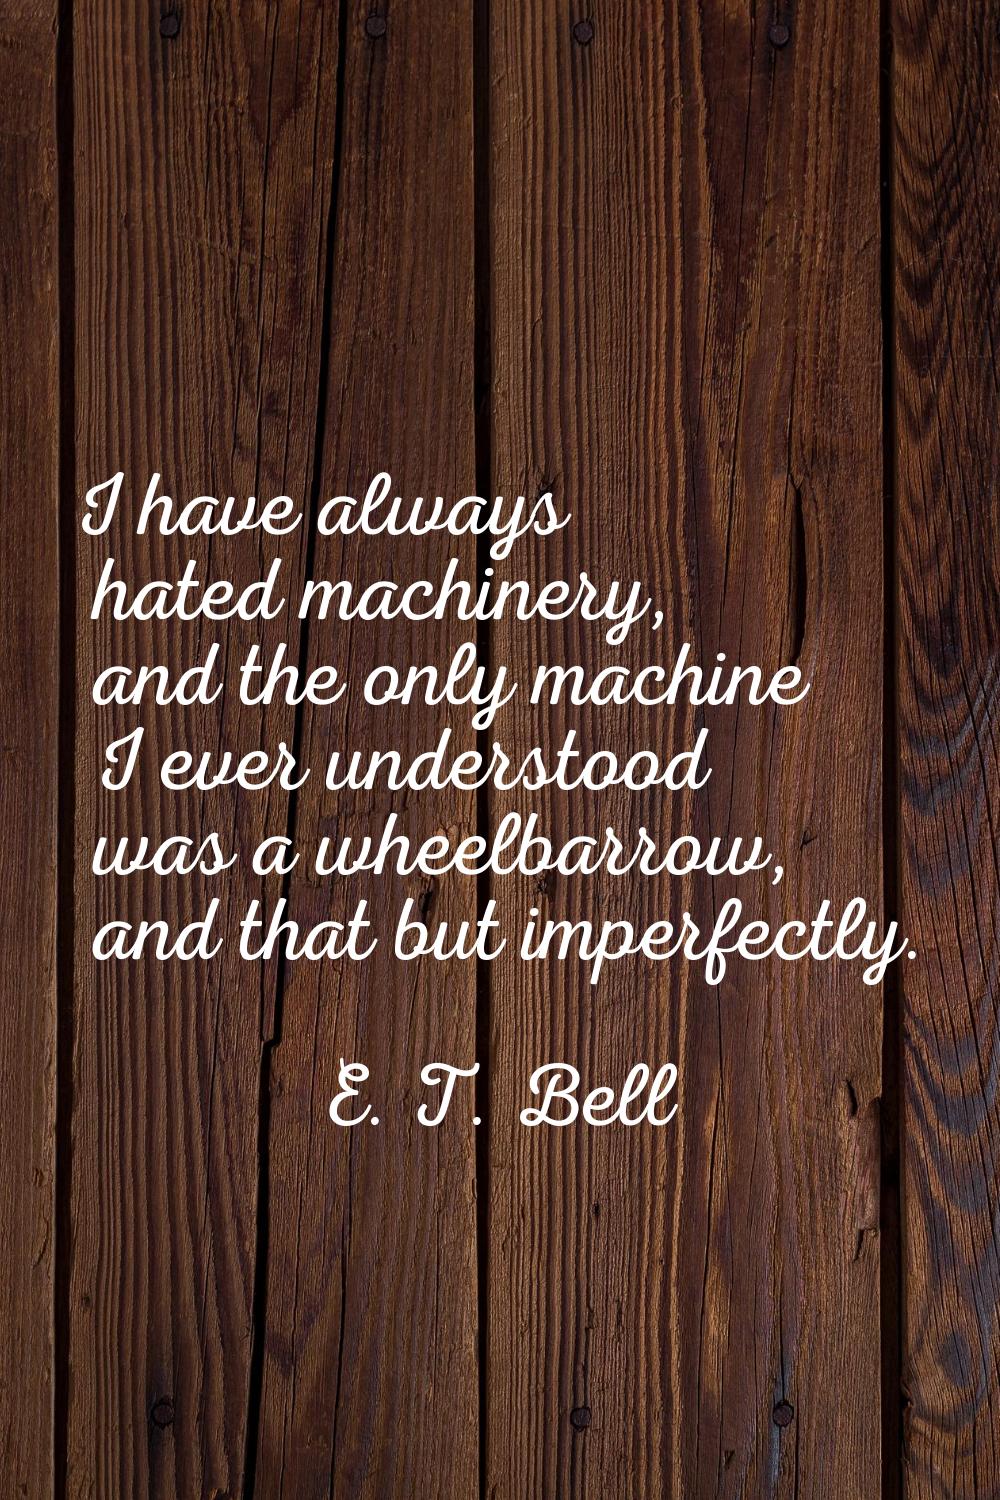 I have always hated machinery, and the only machine I ever understood was a wheelbarrow, and that b